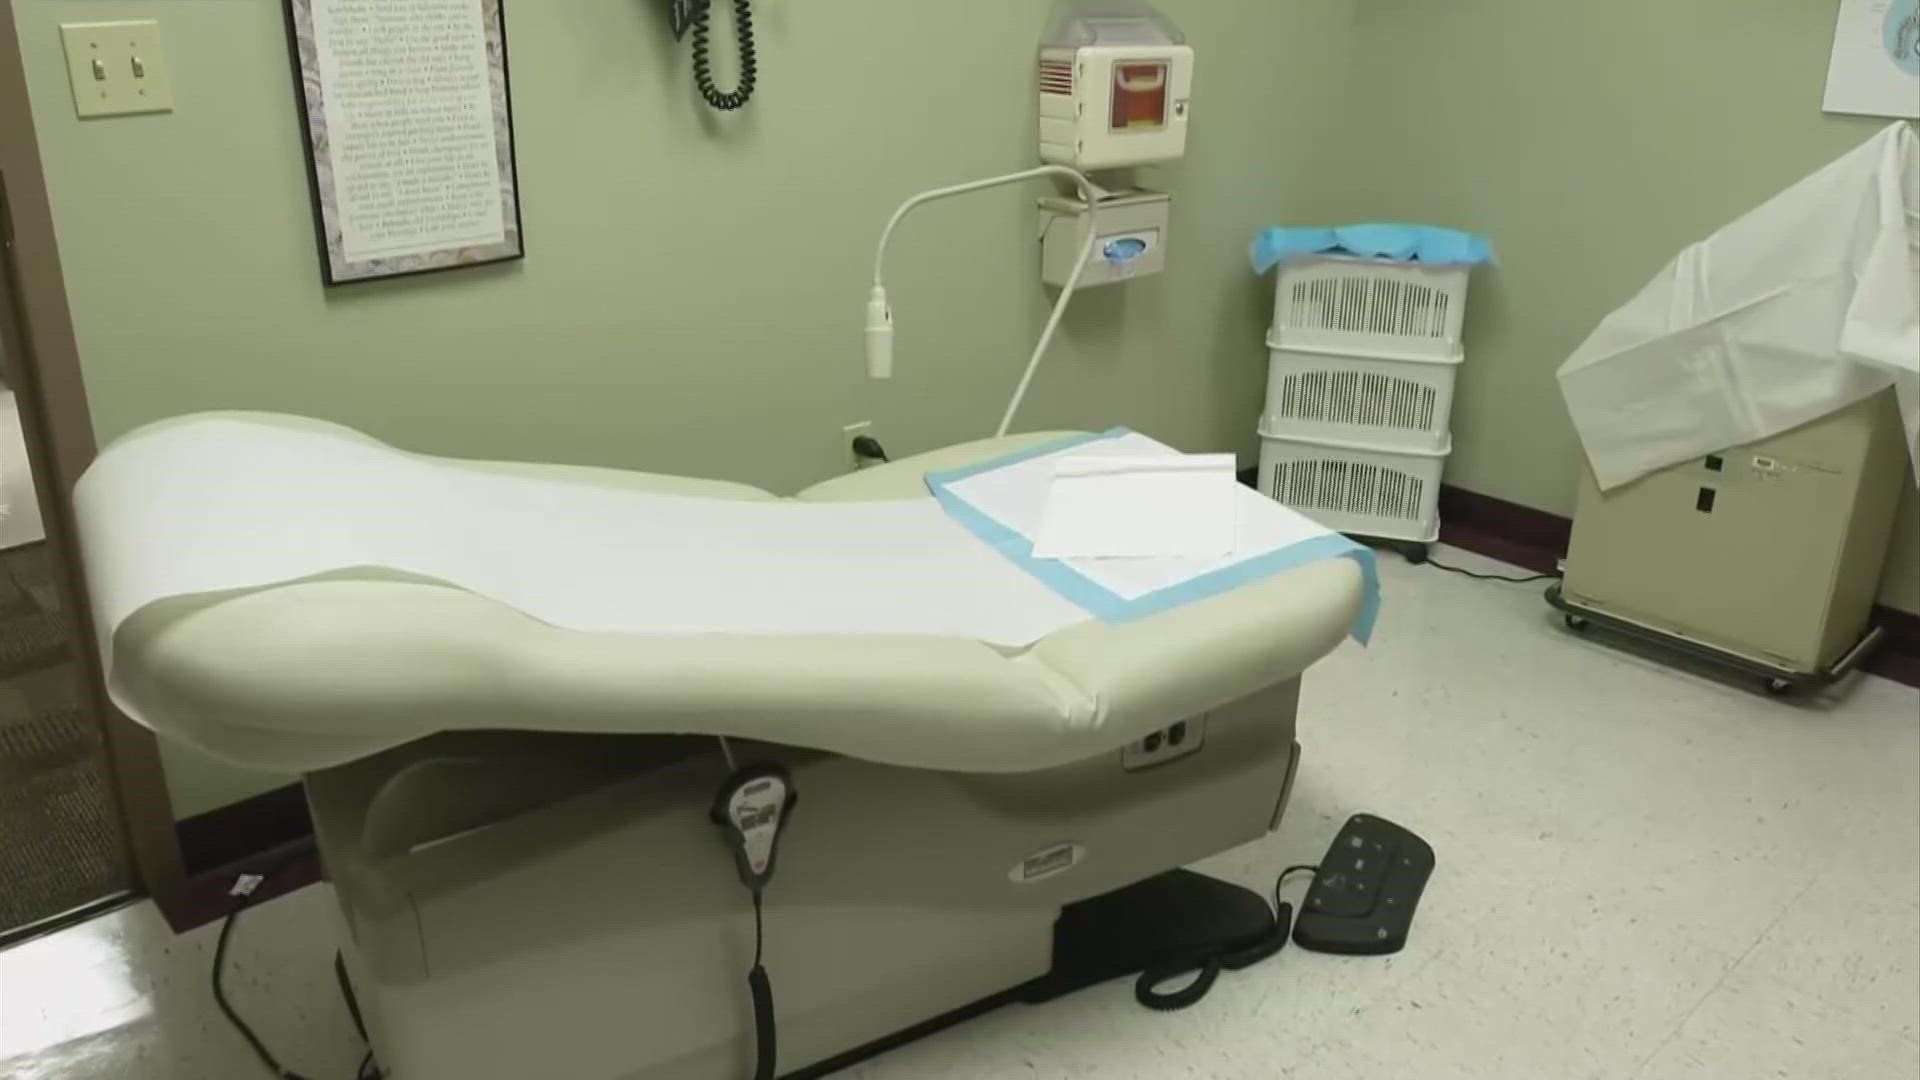 10TV looked at state health data and two studies involving Ohio State researchers to get a sense of the impact a total ban on abortion would have on Ohioans.